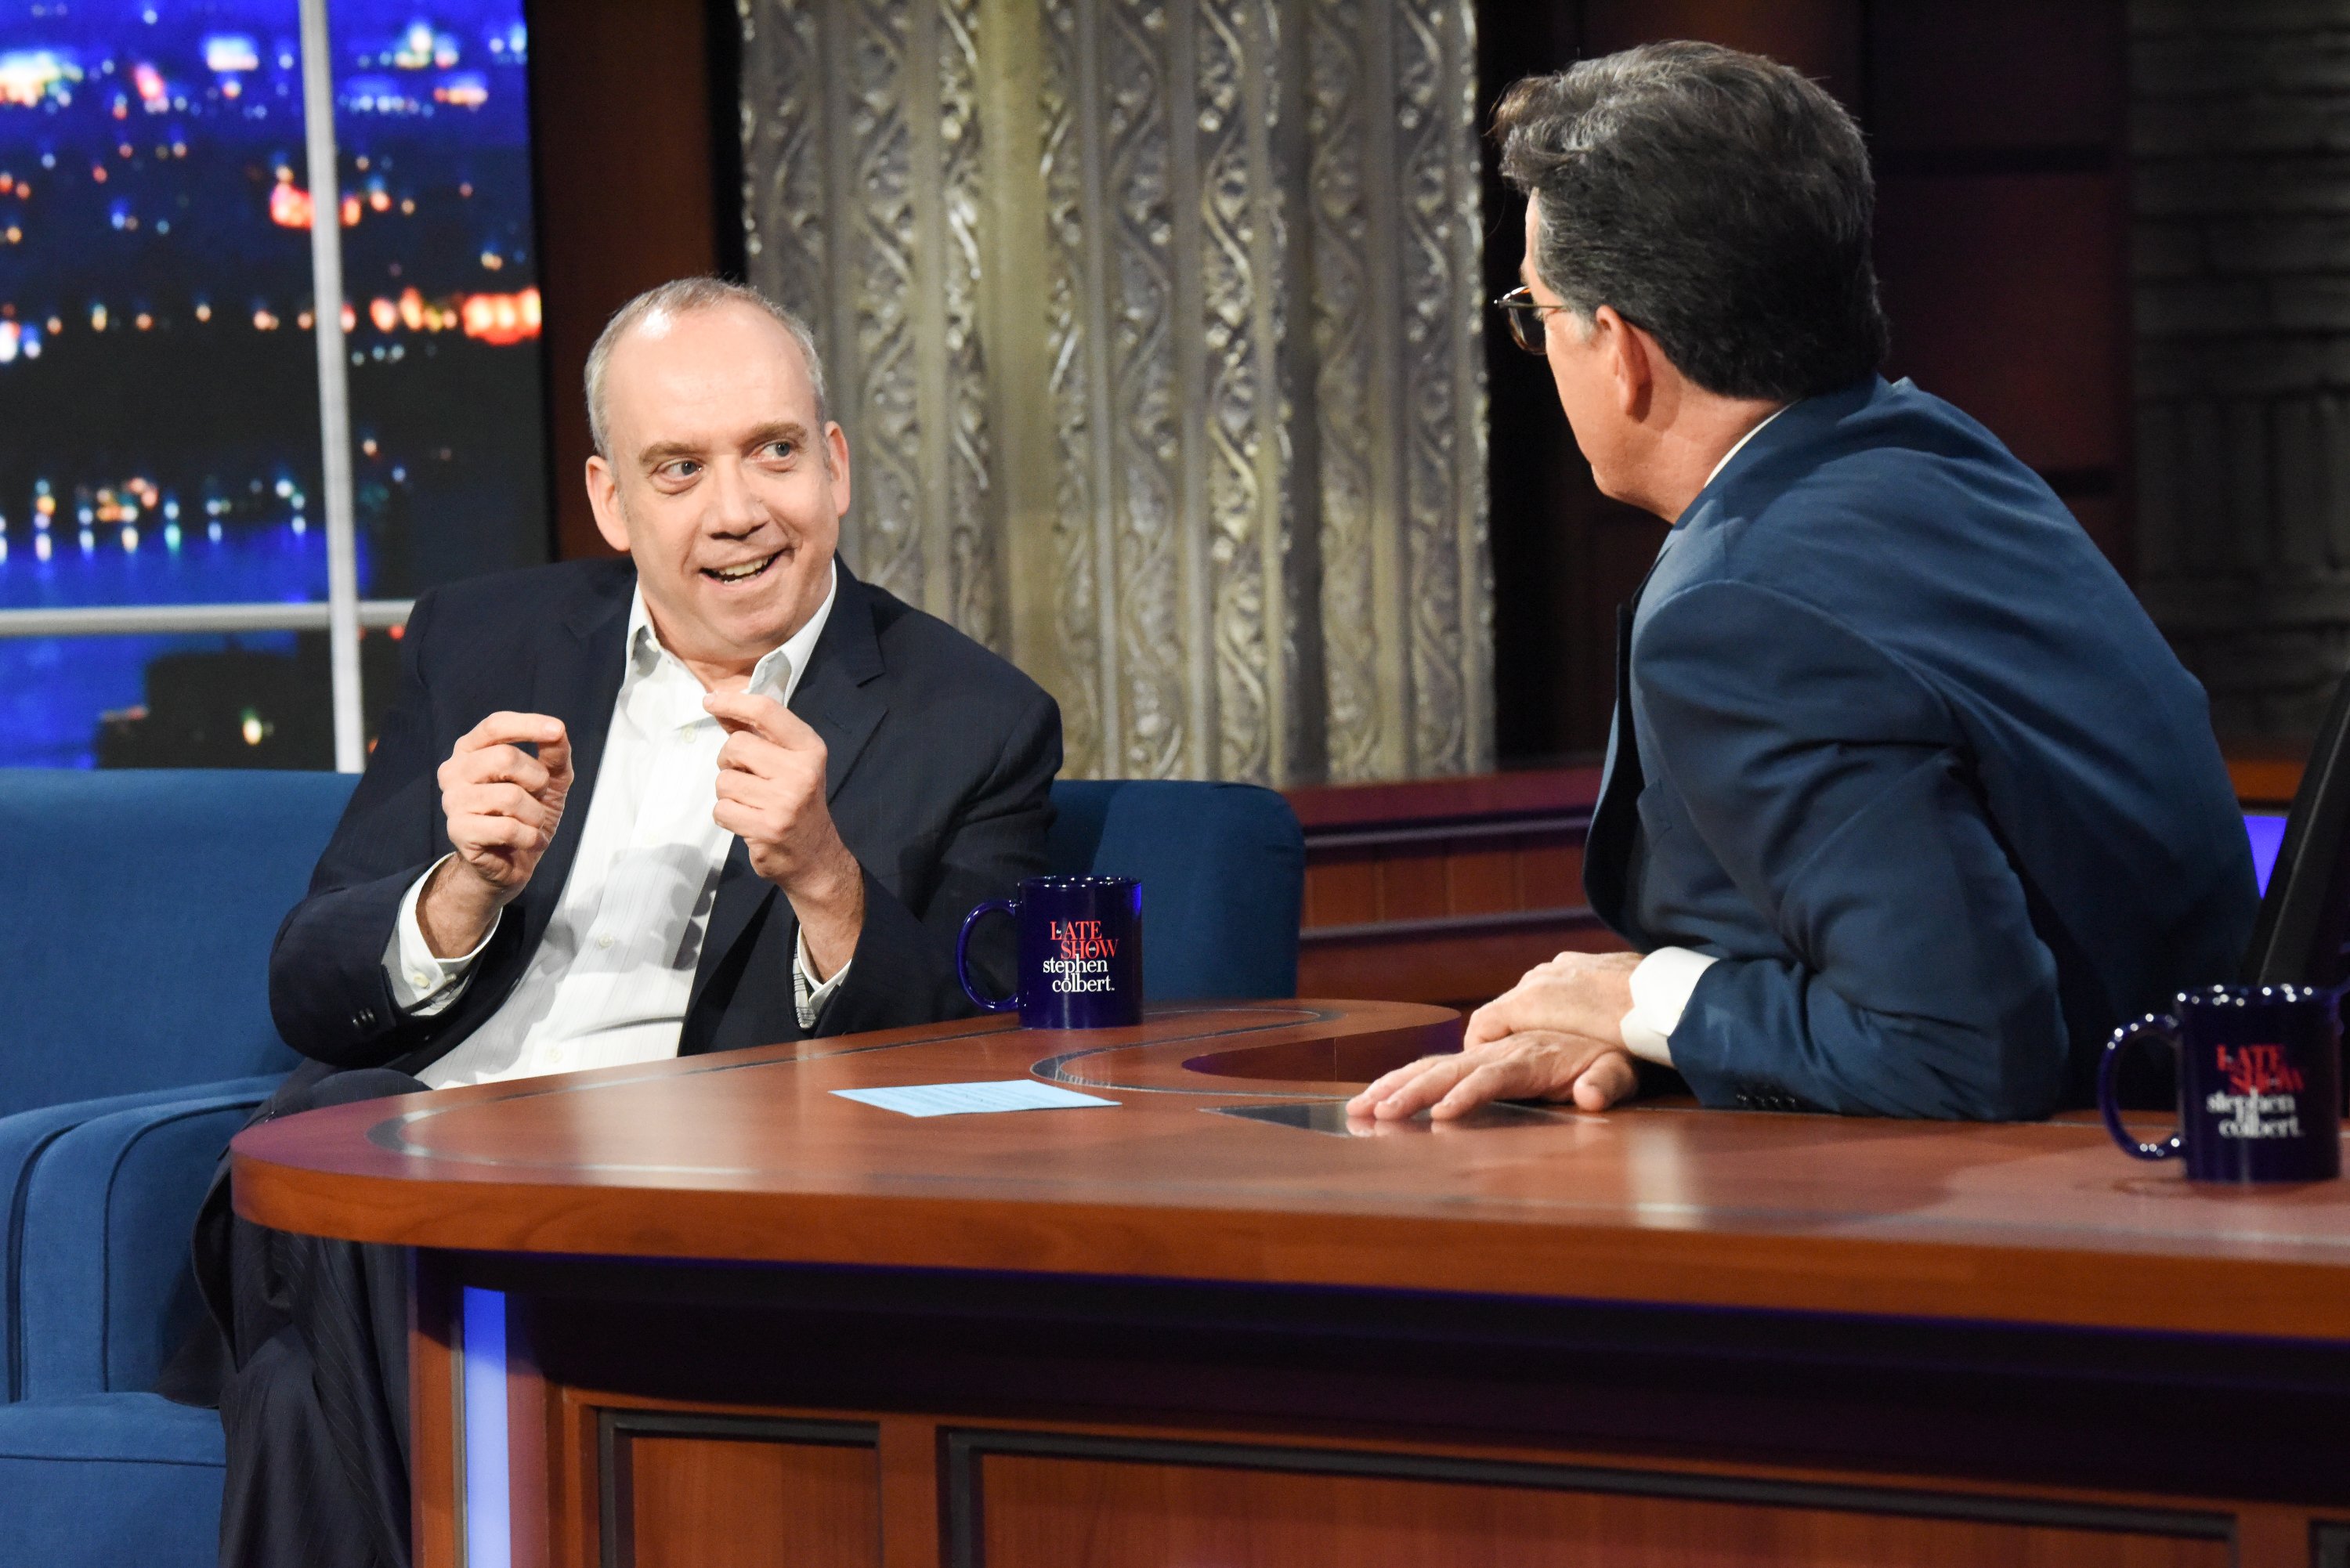 "The Late Show" with Stephen Colbert and guest Paul Giamatti on September 27, 2021. | Source: Getty Images